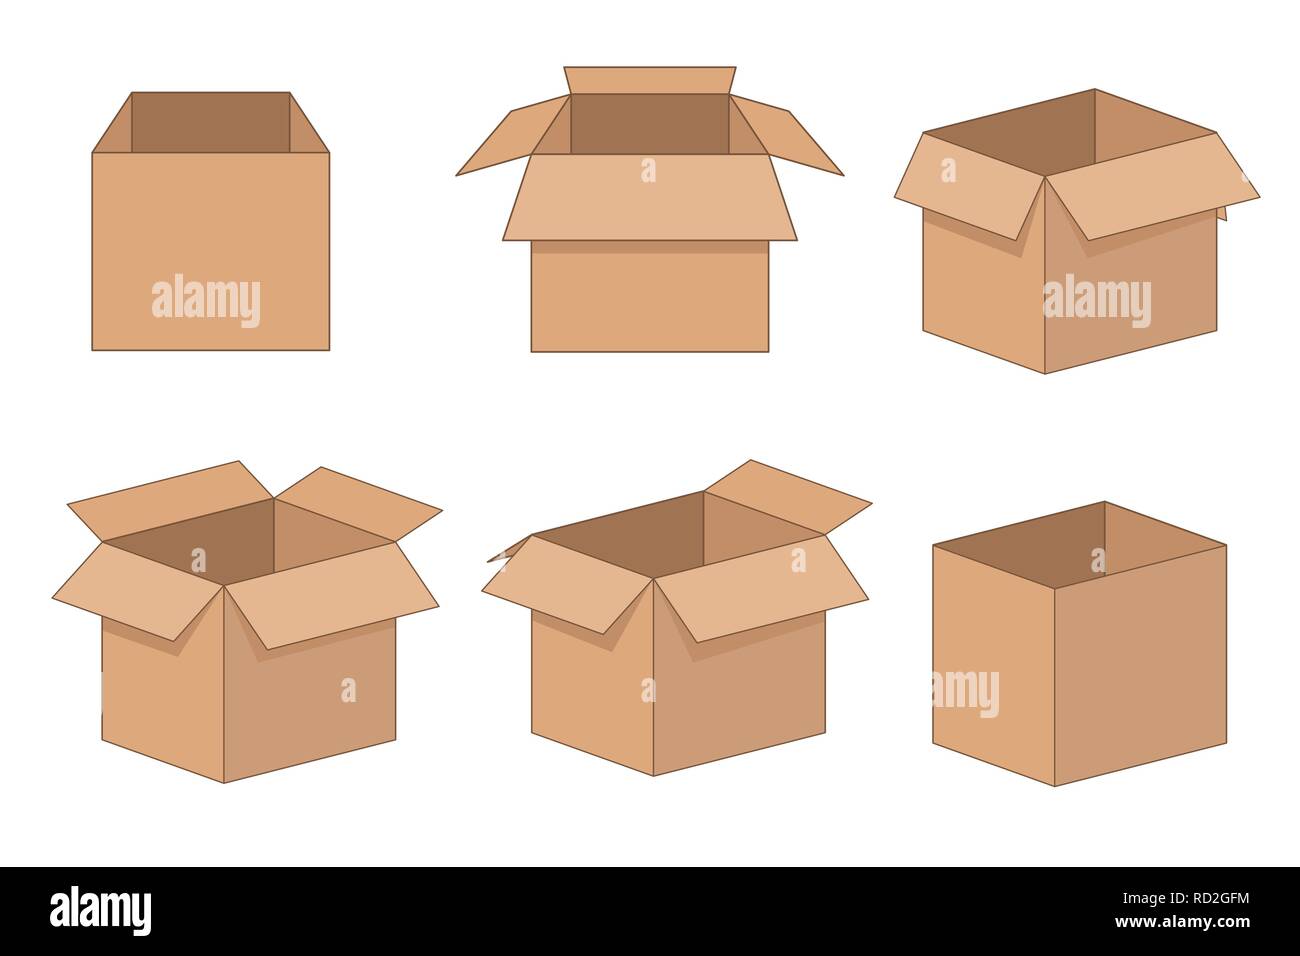 Carton delivery and storage packaging open box set. Vector illustration isolated on white background. Stock Vector